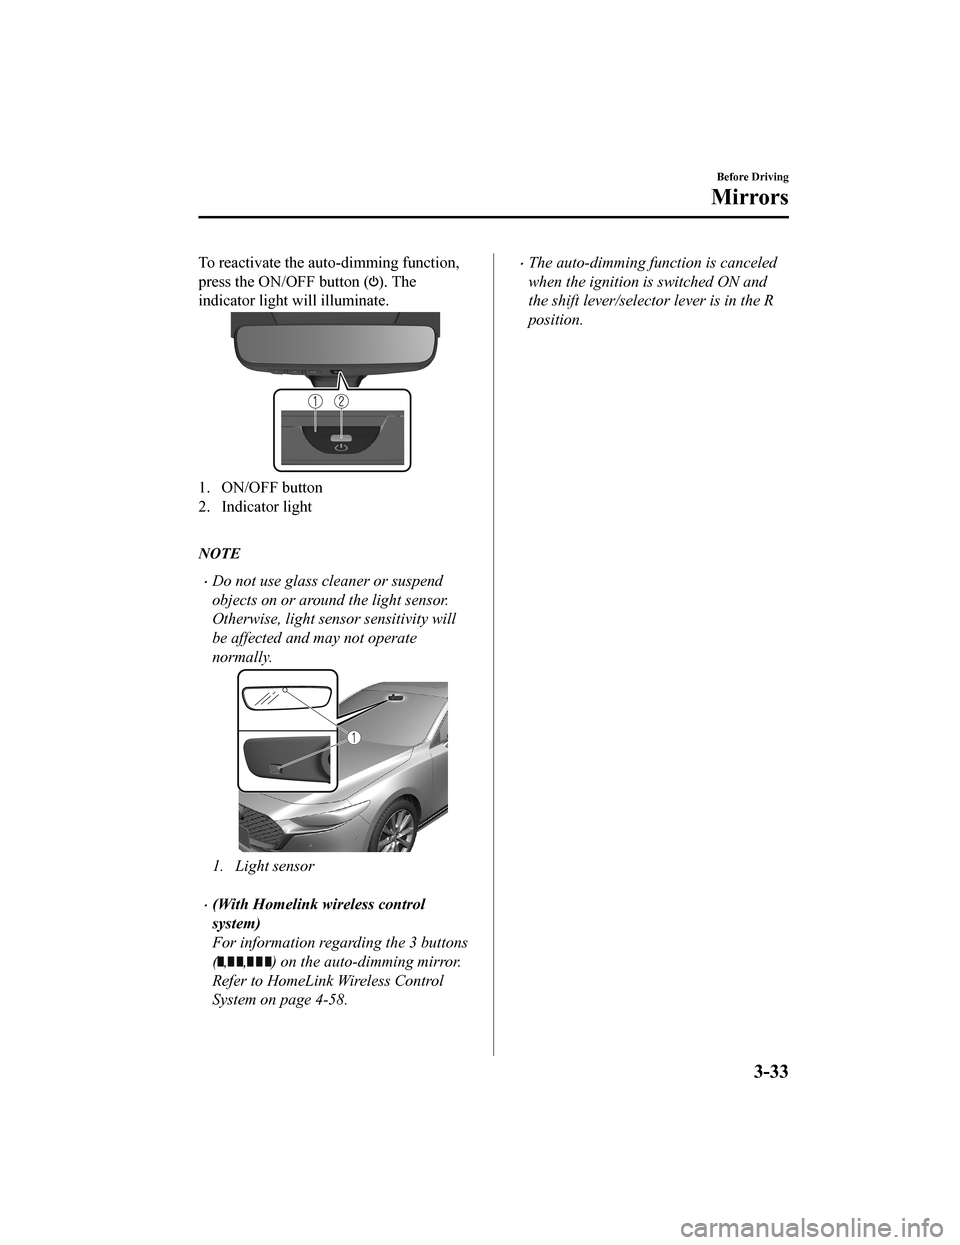 MAZDA MODEL 3 HATCHBACK 2020  Owners Manual (in English) To reactivate the auto-dimming function,
press the ON/OFF button (
). The
indicator light will illuminate.
1. ON/OFF button
2. Indicator light
 
NOTE
Do not use glass cleaner or suspend
objects on 